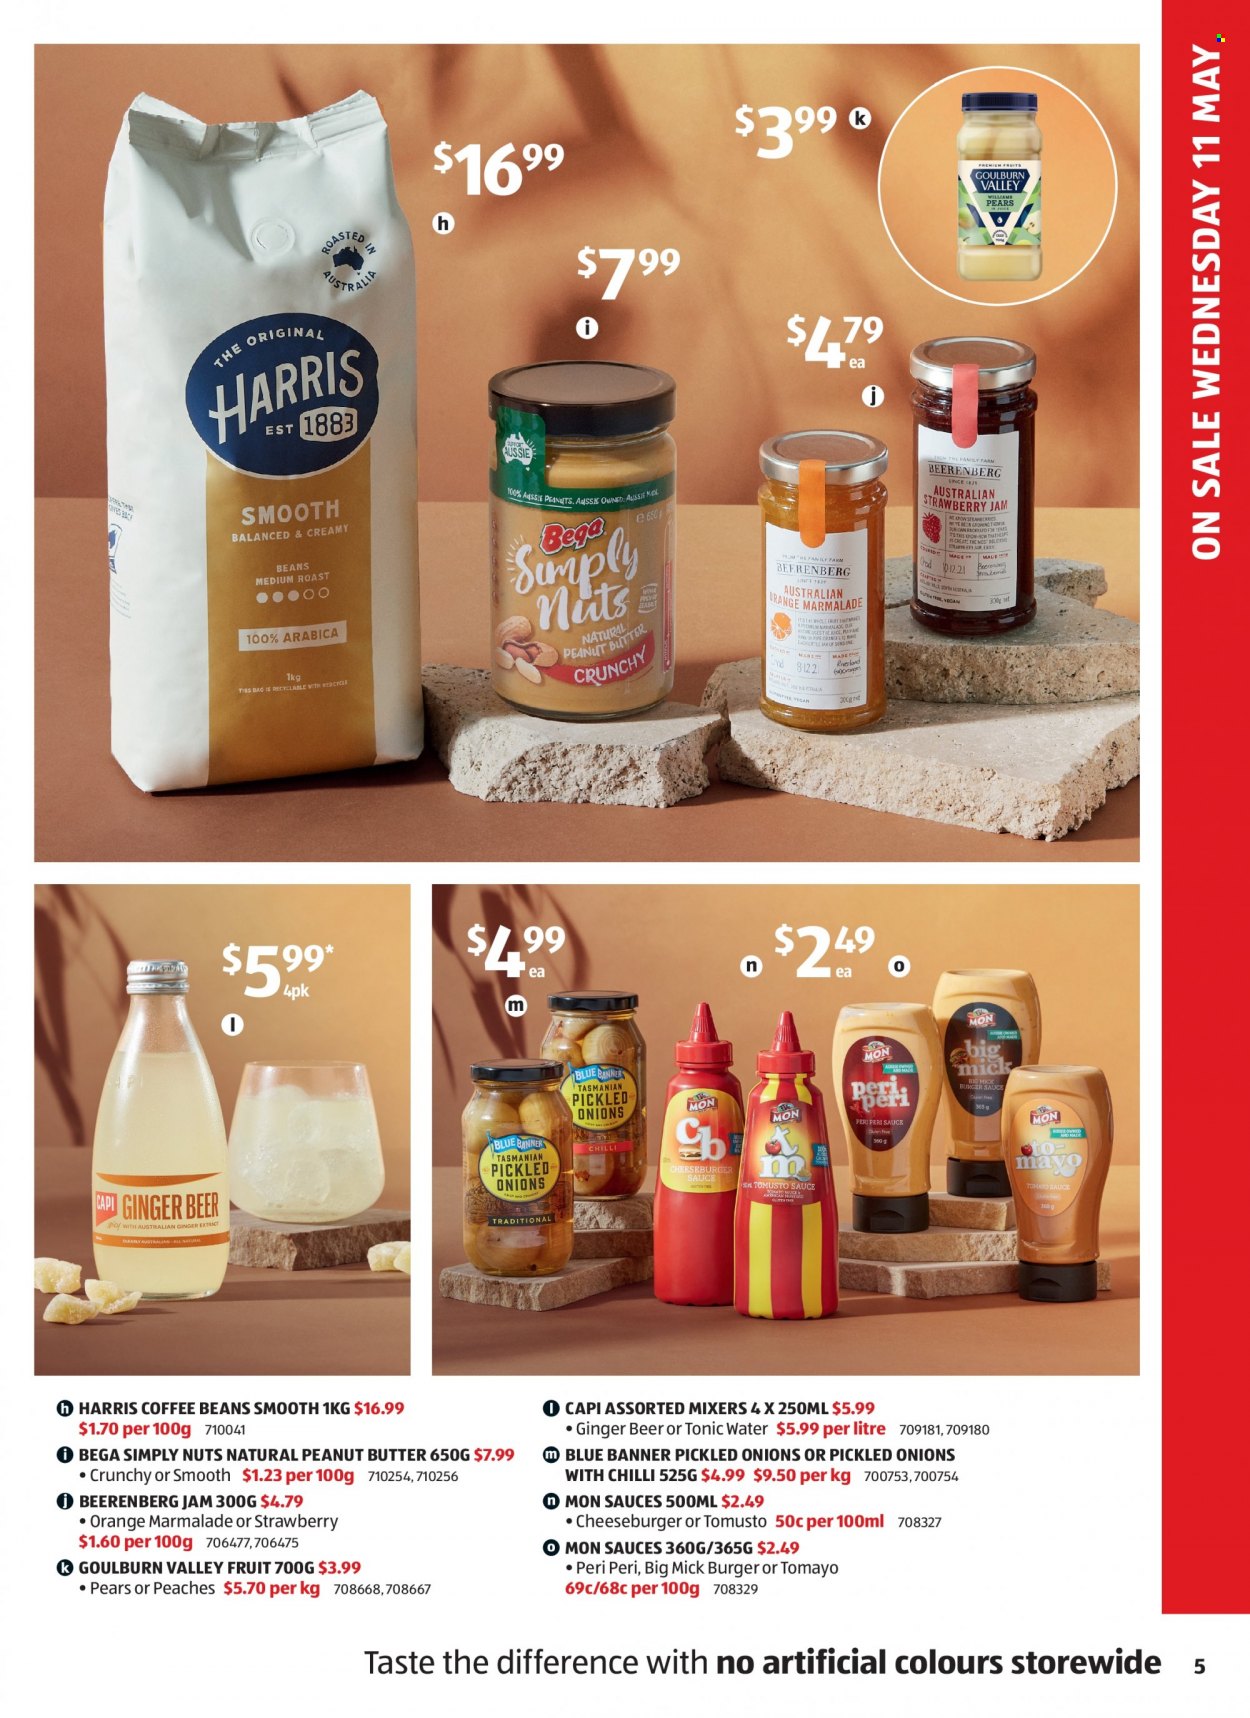 ALDI Catalogue - 12 May 2022 - 18 May 2022 - Sales products - onion, pears, orange, peaches, cheeseburger, mayonnaise, Harris, strawberry jam, peri peri sauce, jam, peanut butter, peanuts, nuts, juice, tonic, coffee beans, beer, Aussie, pipe, ginger beer. Page 5.